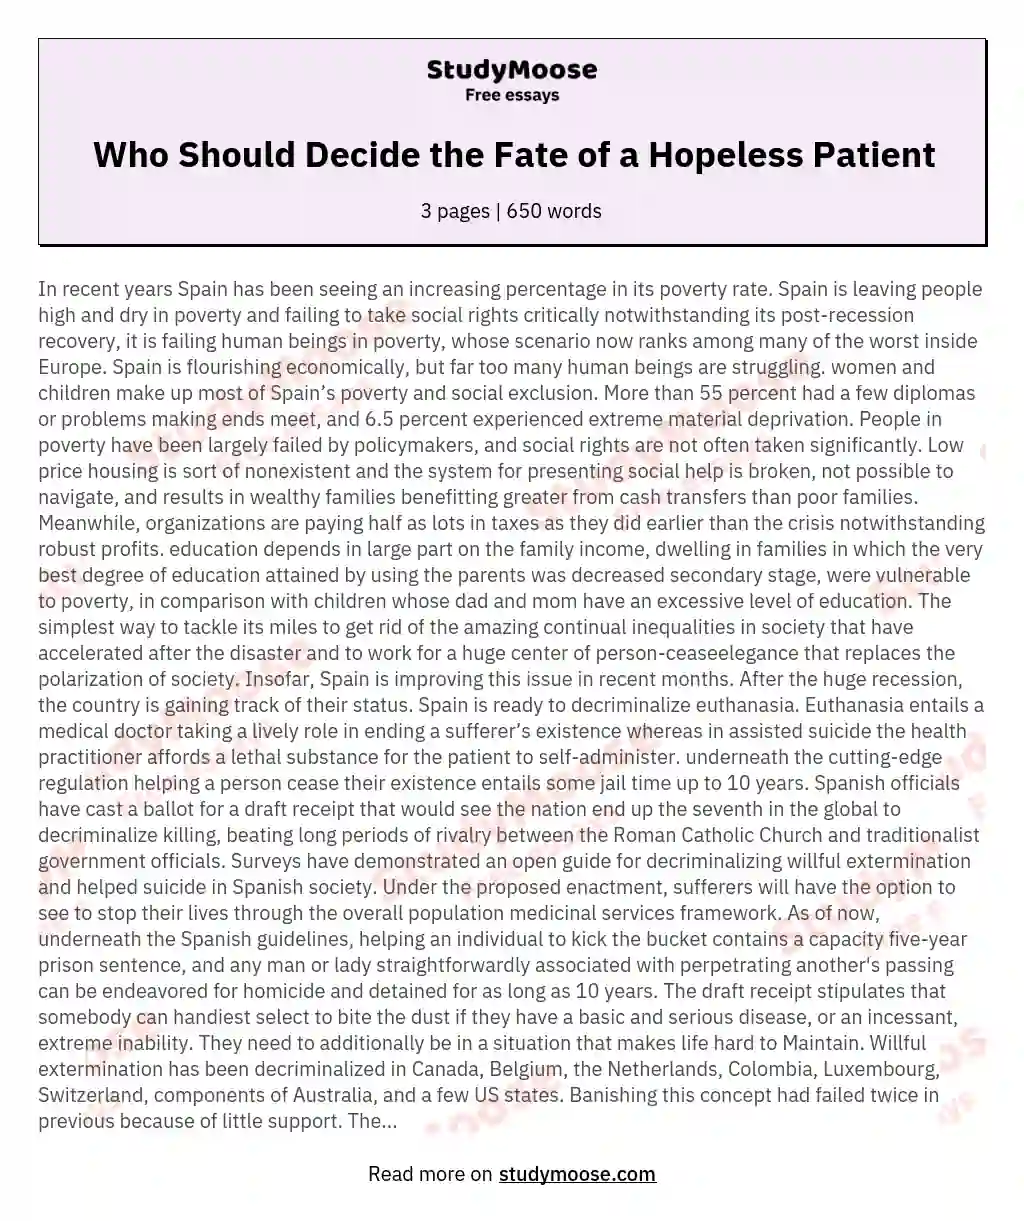 Who Should Decide the Fate of a Hopeless Patient essay